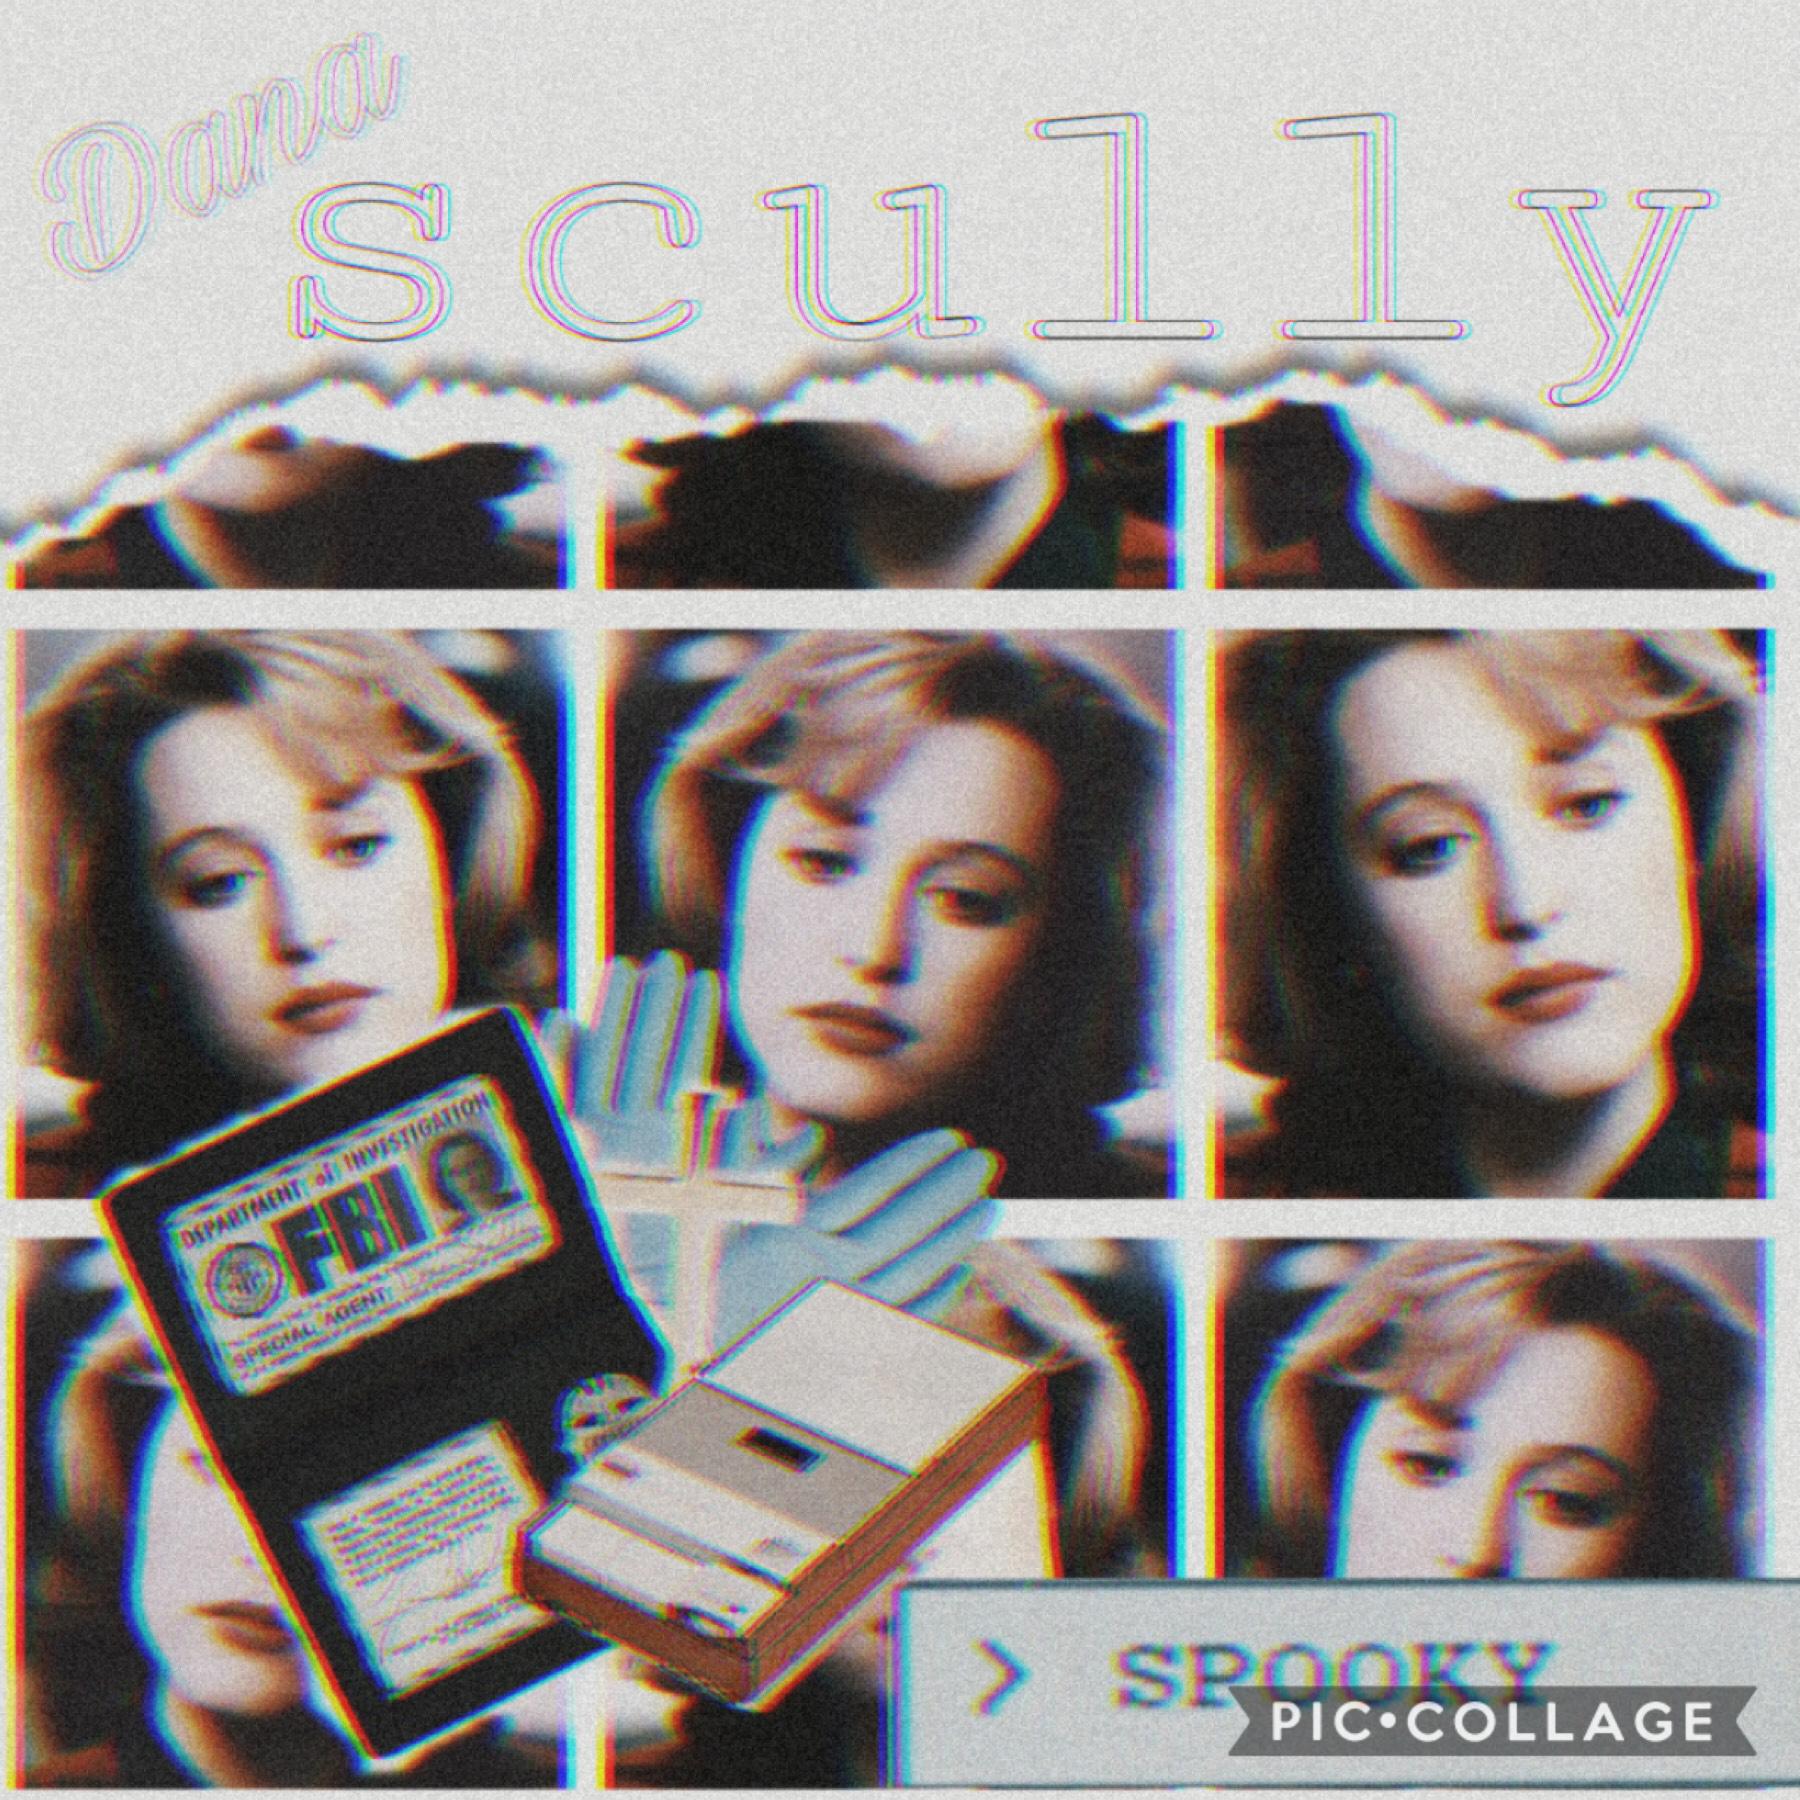 i looked LONG and HARD on this. i’m pretty proud of the results! does anyone else watch xfiles??
background: Pic collage. filters/text: PicsArt 
i’ll put some of the other filters i like in the remixes.